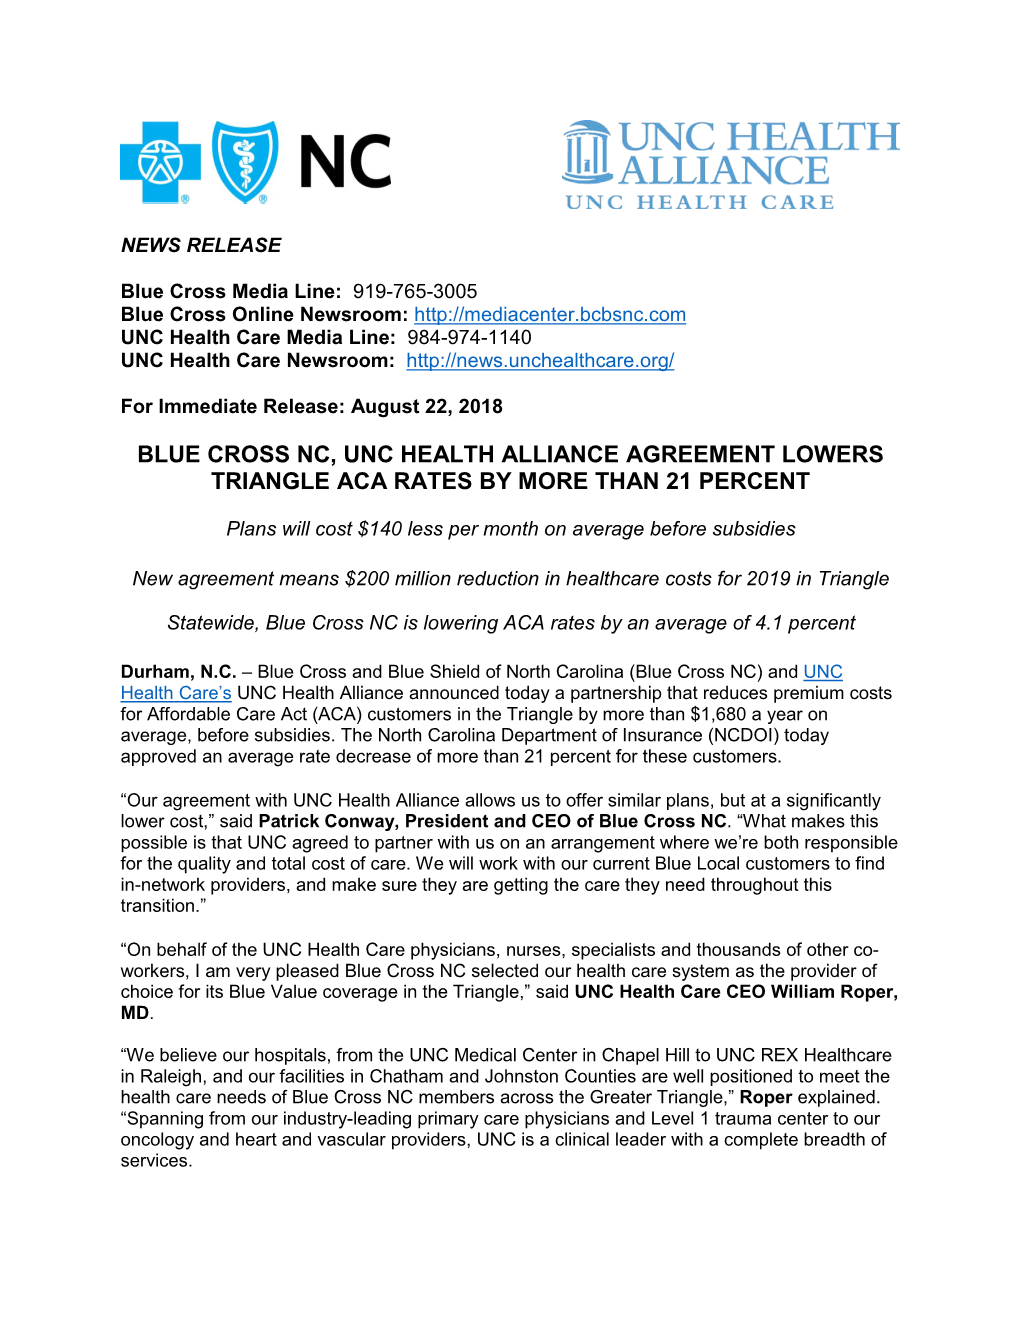 Blue Cross NC, UNC Health Alliance Agreement Lowers Tringle ACA Rates by More Than 21 Percent